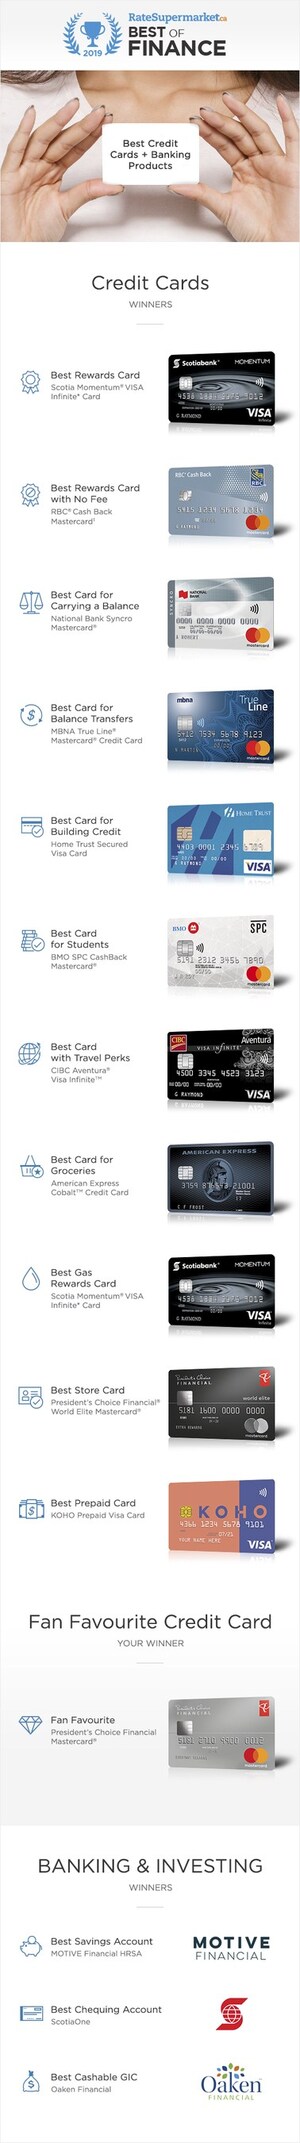 Eighth Annual Report Reveals Canada's Best Credit Cards and Personal Banking Products for 2019